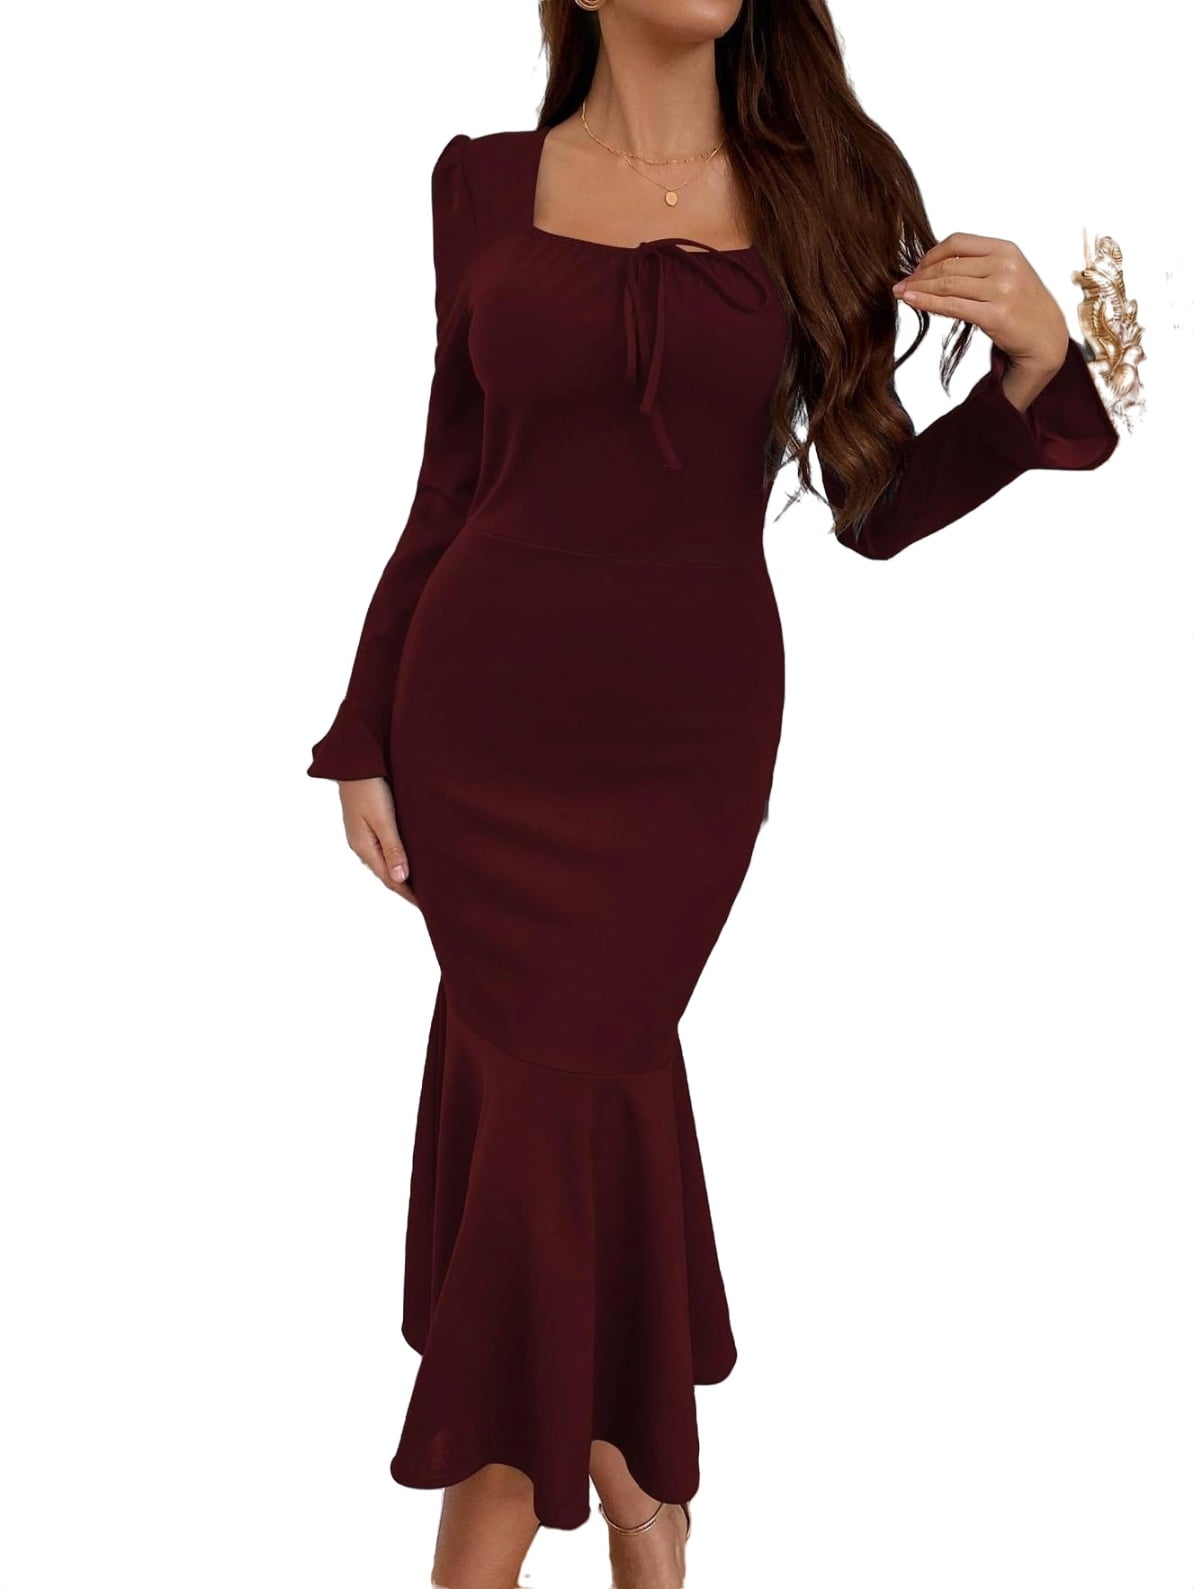 Captivating Maroon Rayon Party Wear Long Frock Gown Dress - RJ Fashion